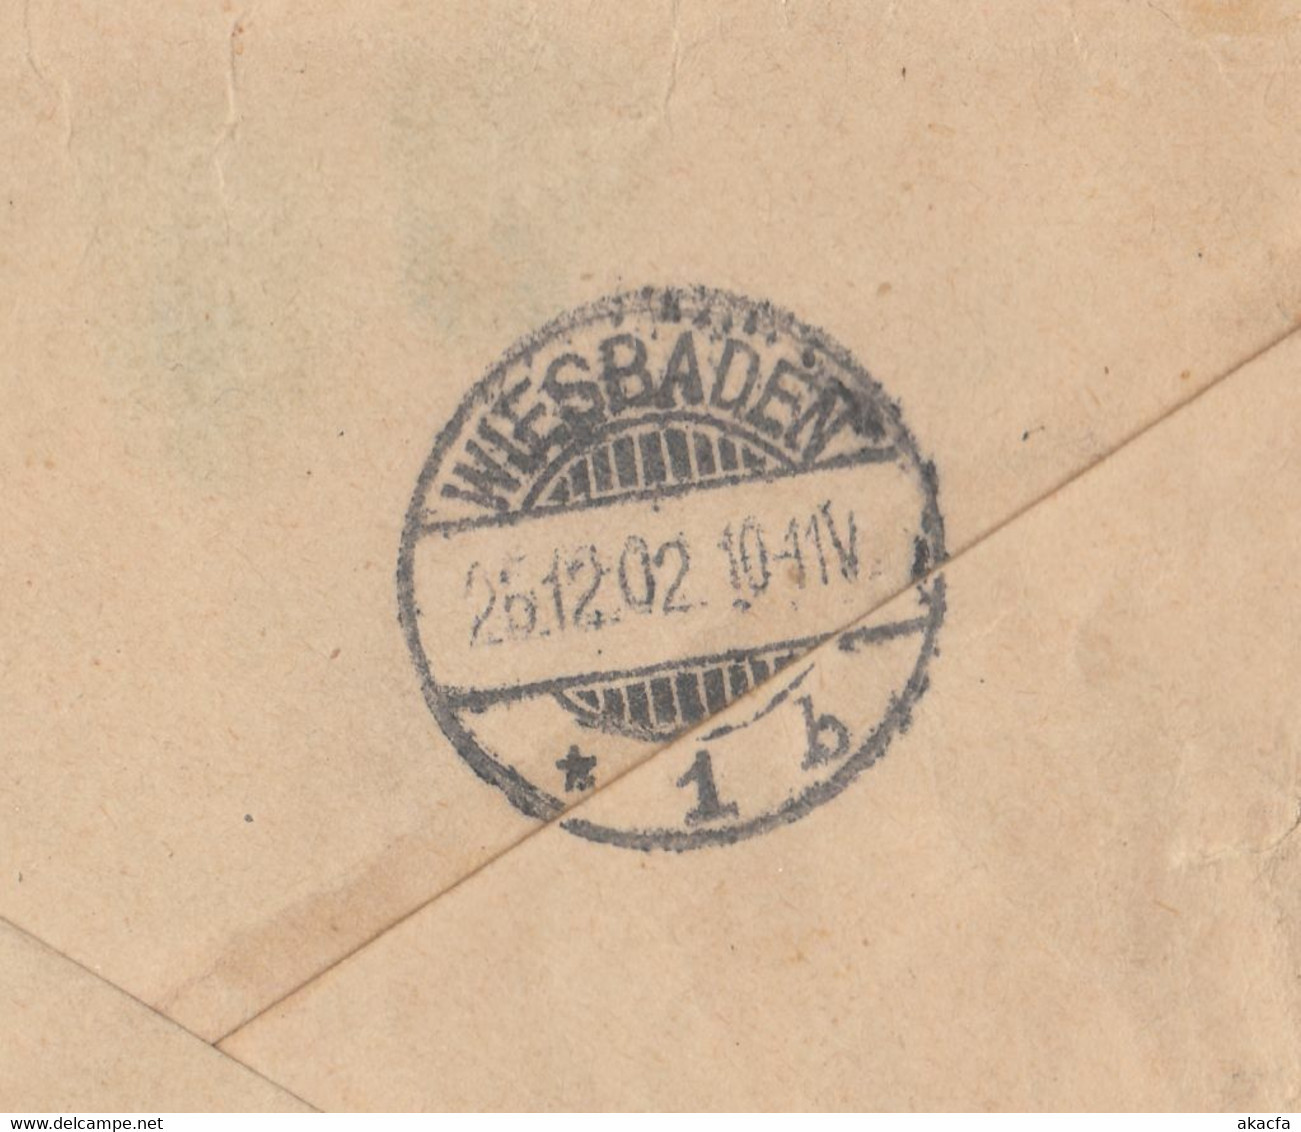 CHINA 1902 Registered Cover Deutsche Post Shanghai Mixed Franking (c023) - Covers & Documents